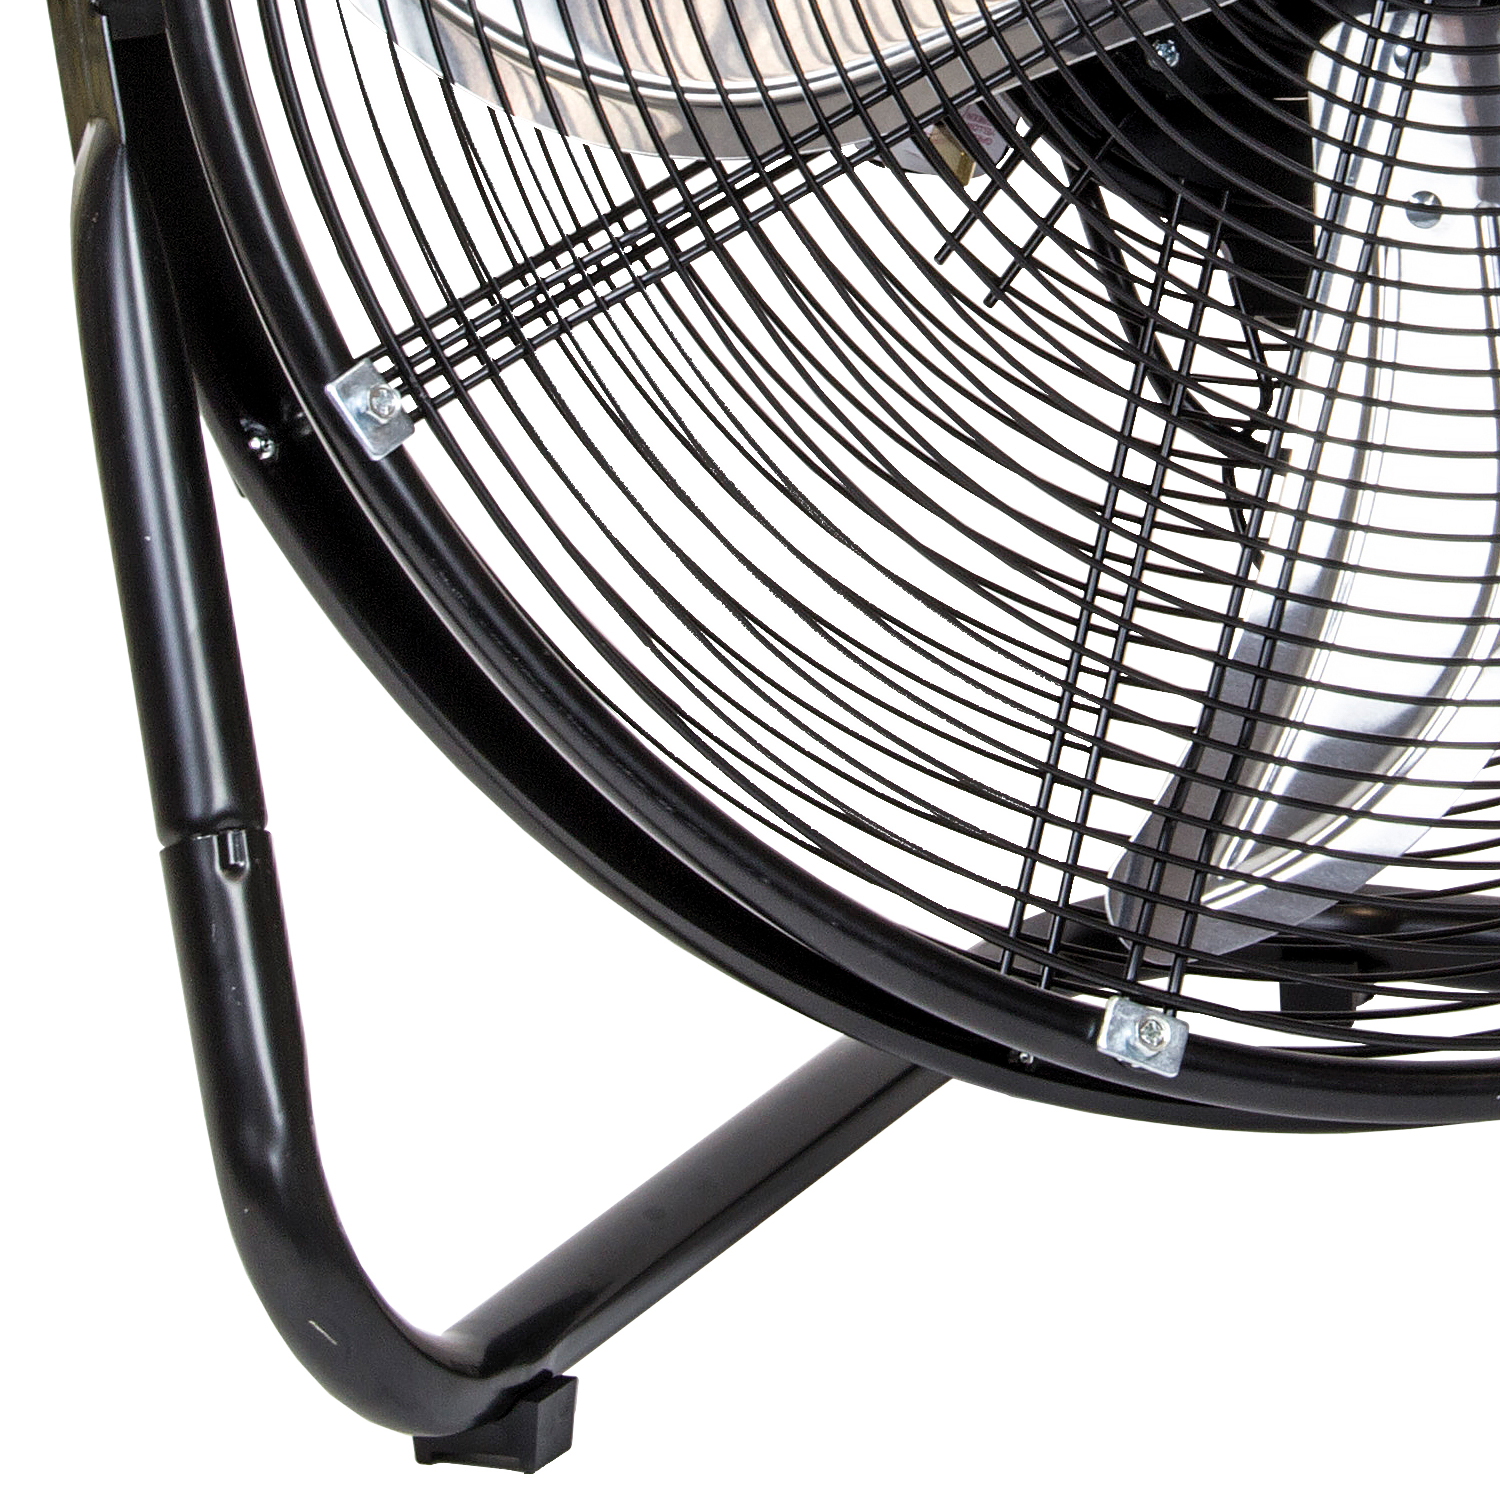 SIP 20" Floor Standing Fan 05613 Efficient ventilation of odours, fumes, and stale air